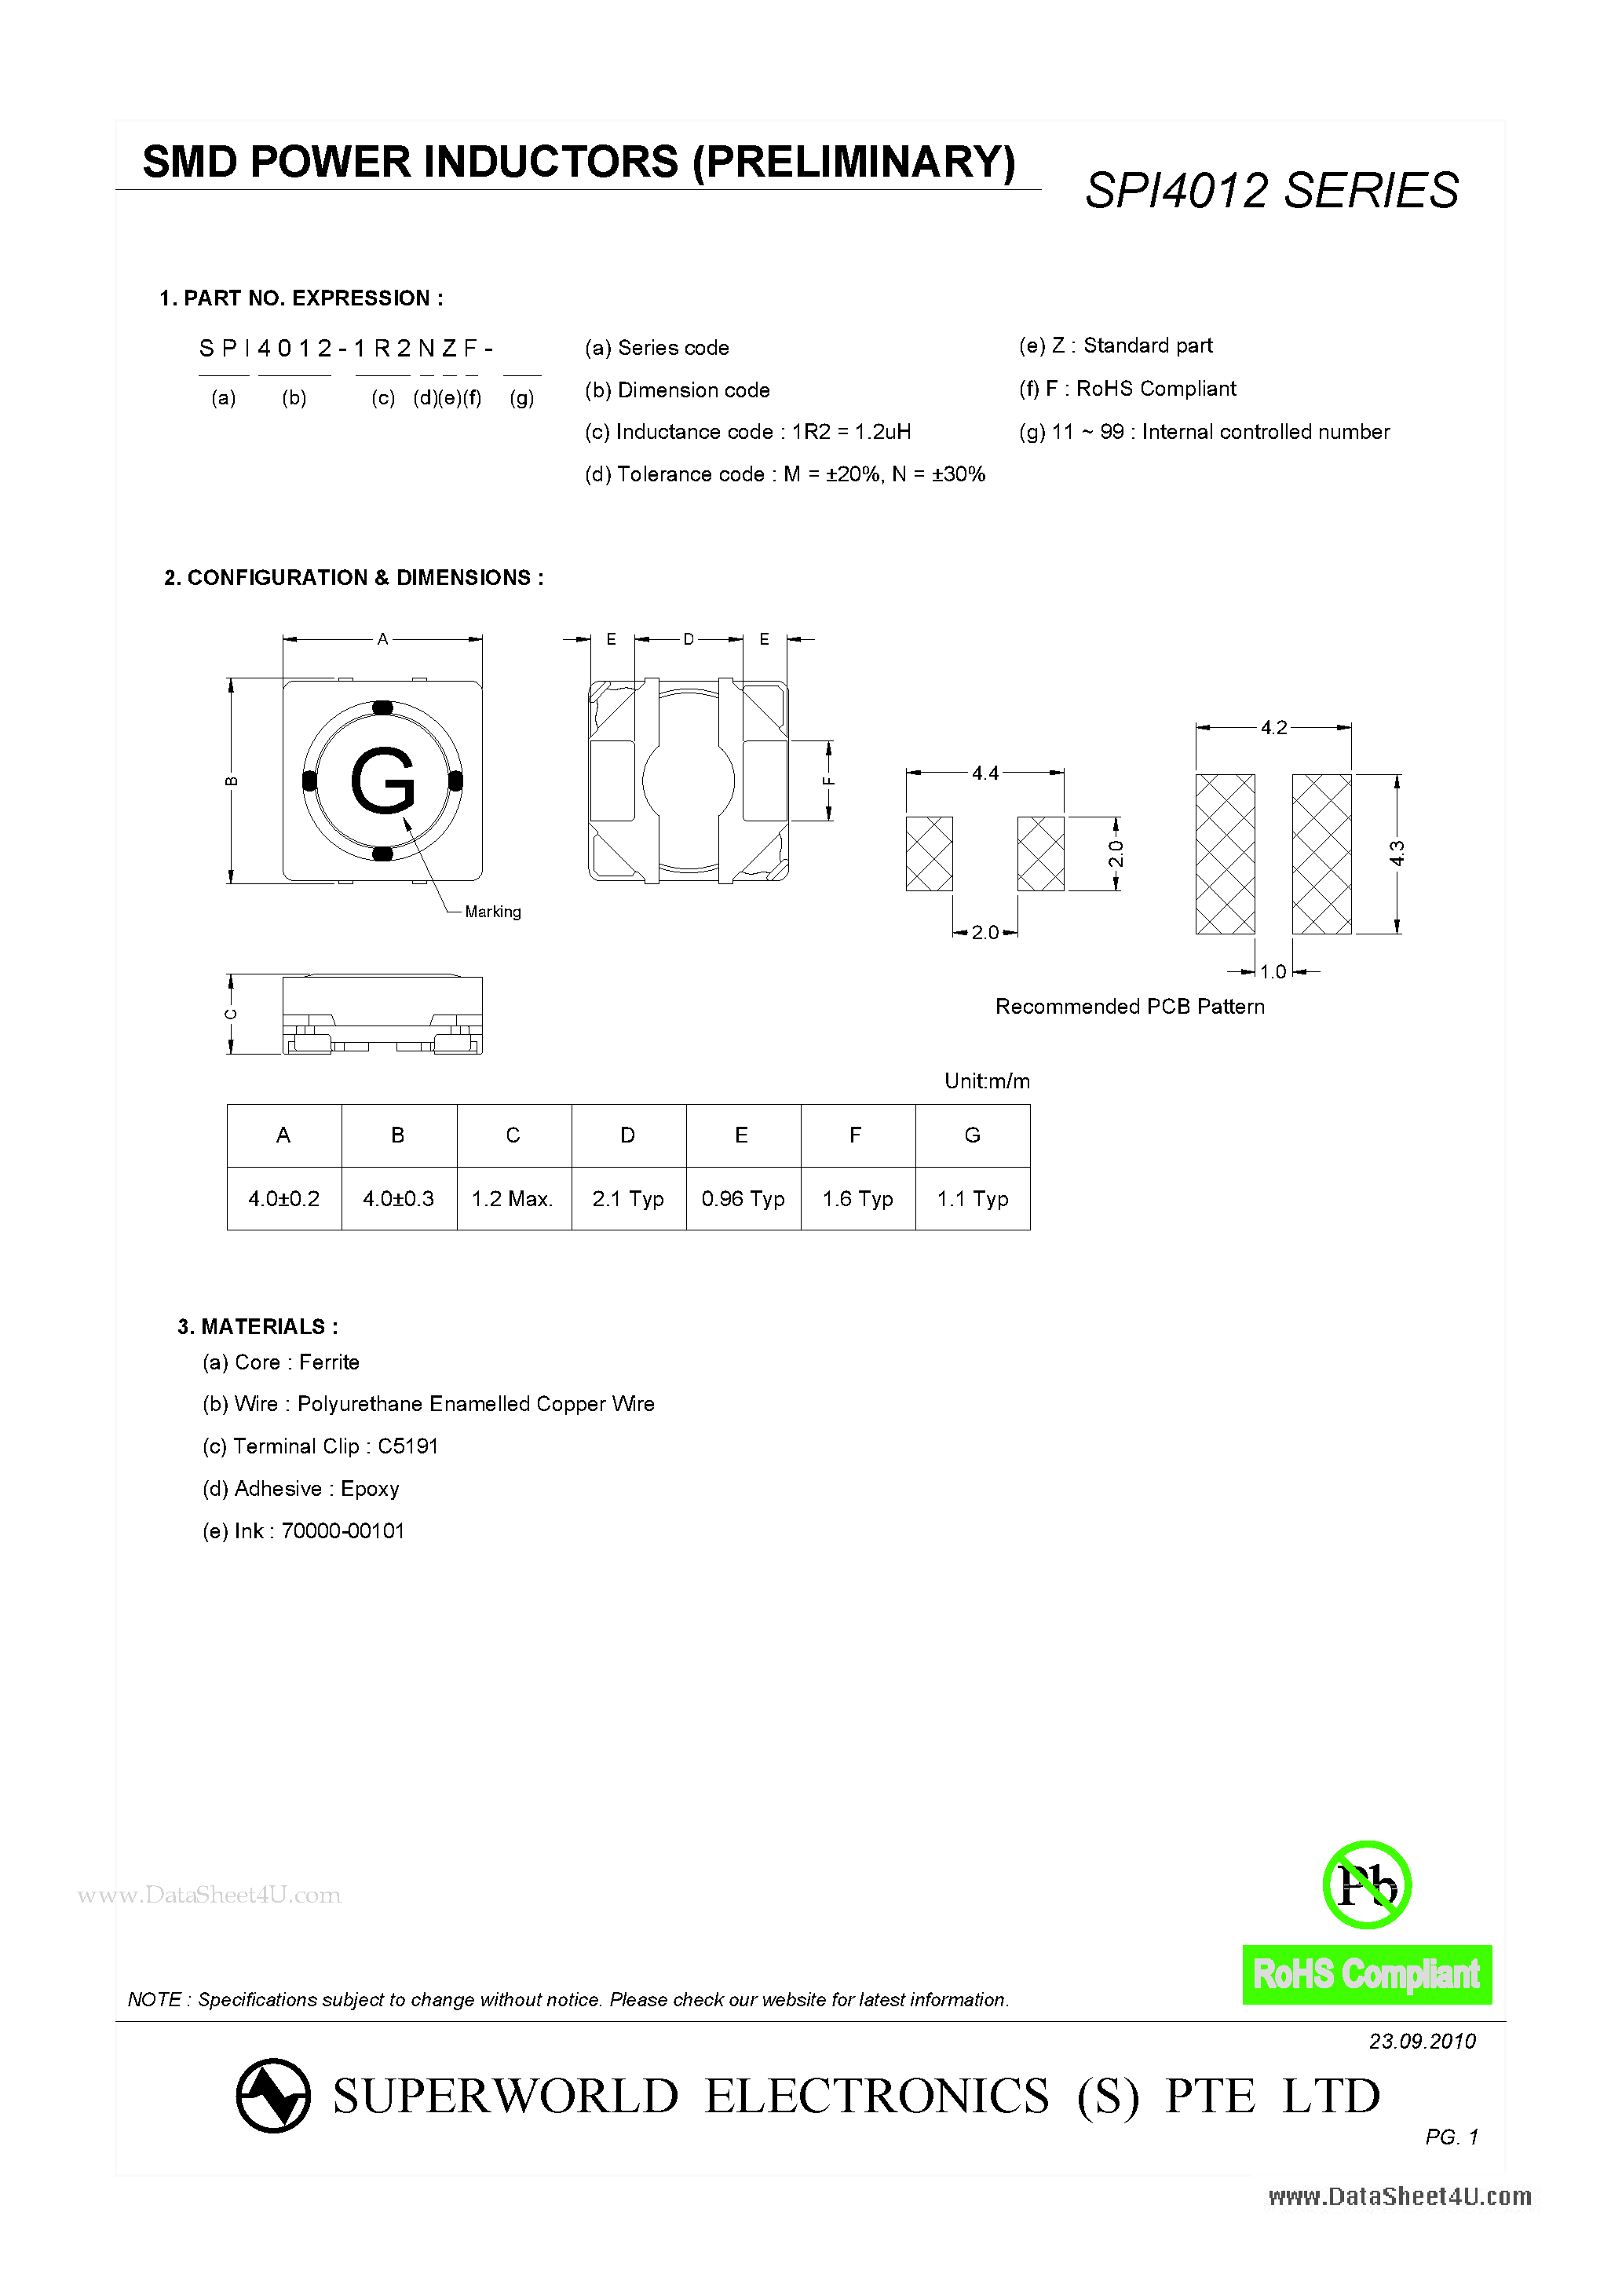 Datasheet SPI4012 - SMD POWER INDUCTORS page 1